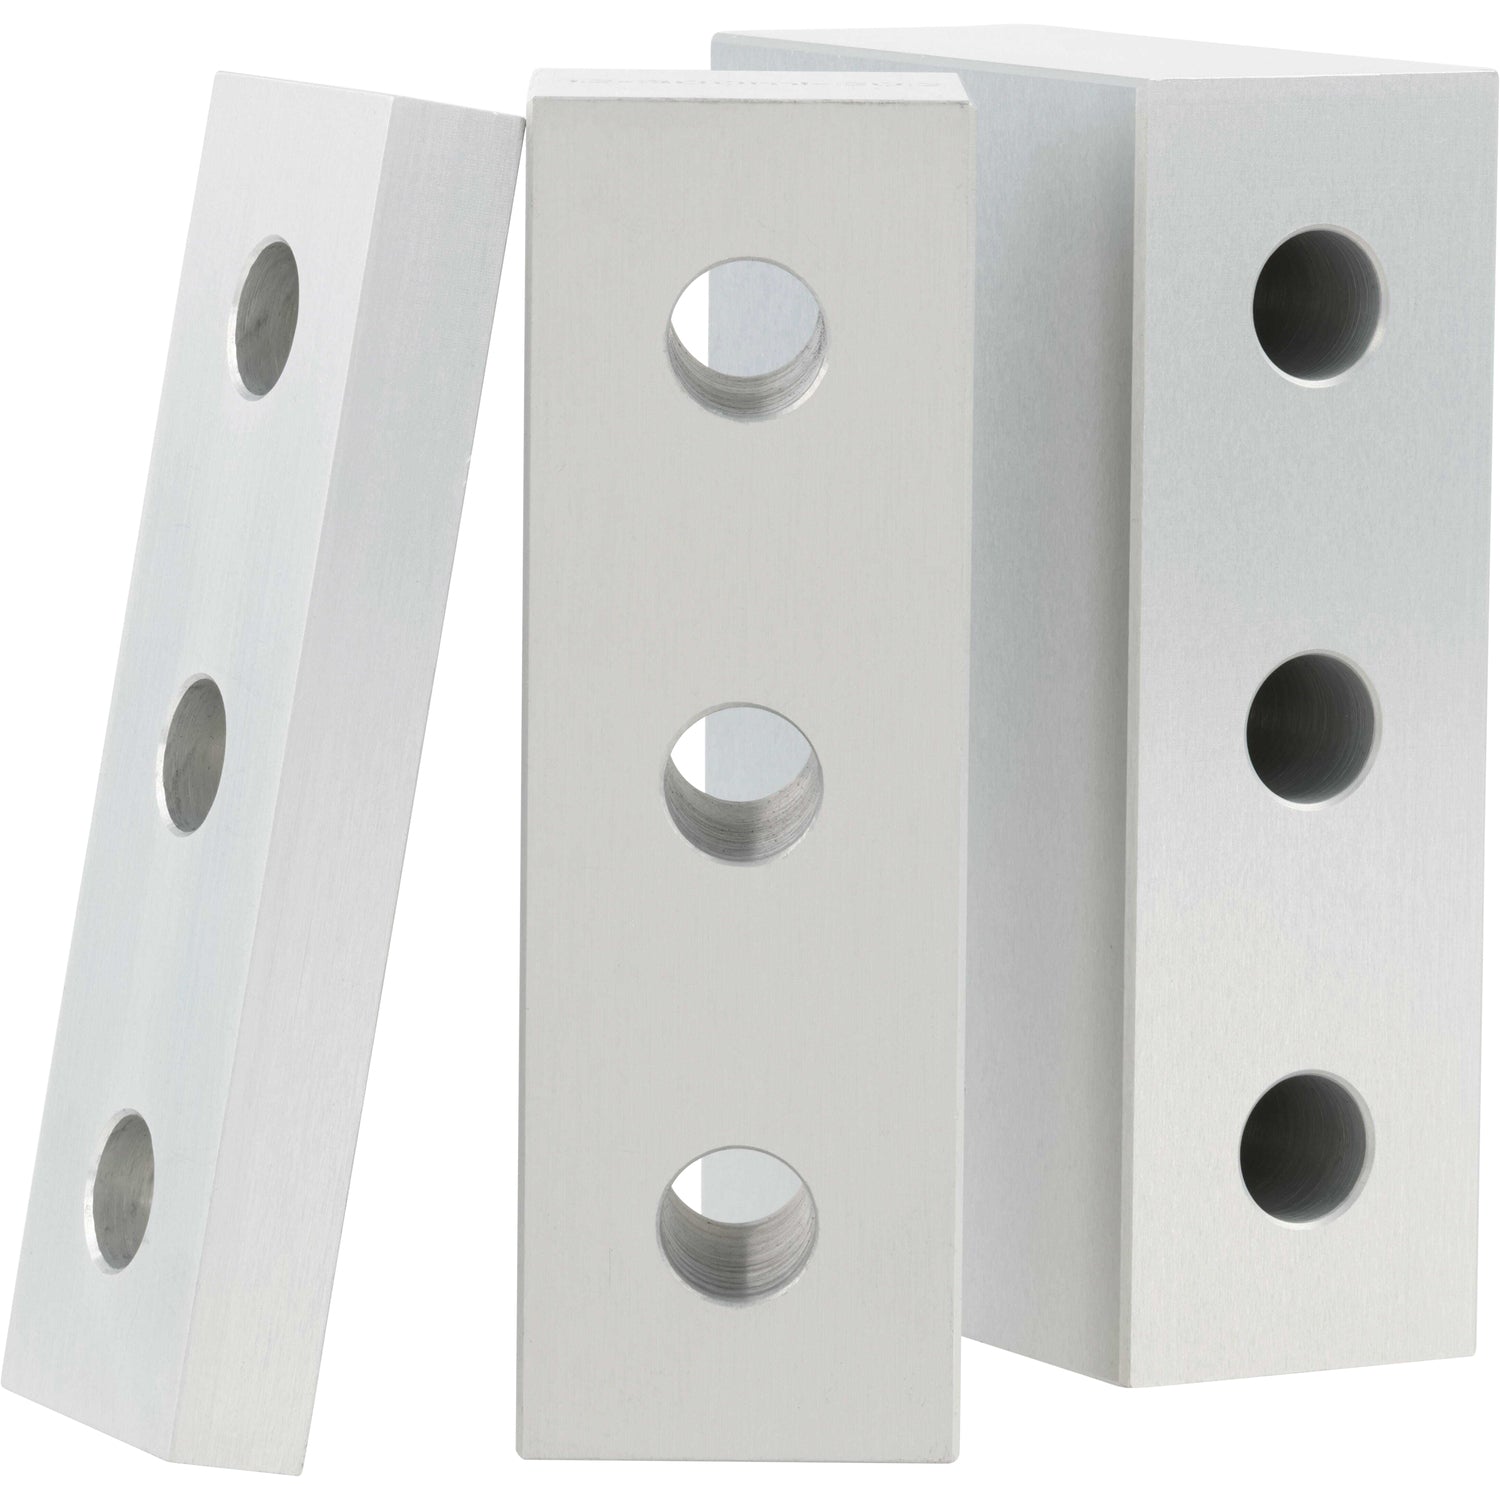 Three differently sized, grey rectangular blocks made of hard anodized aluminum. Each block as three evenly spaced through holes. Parts shown on white background.